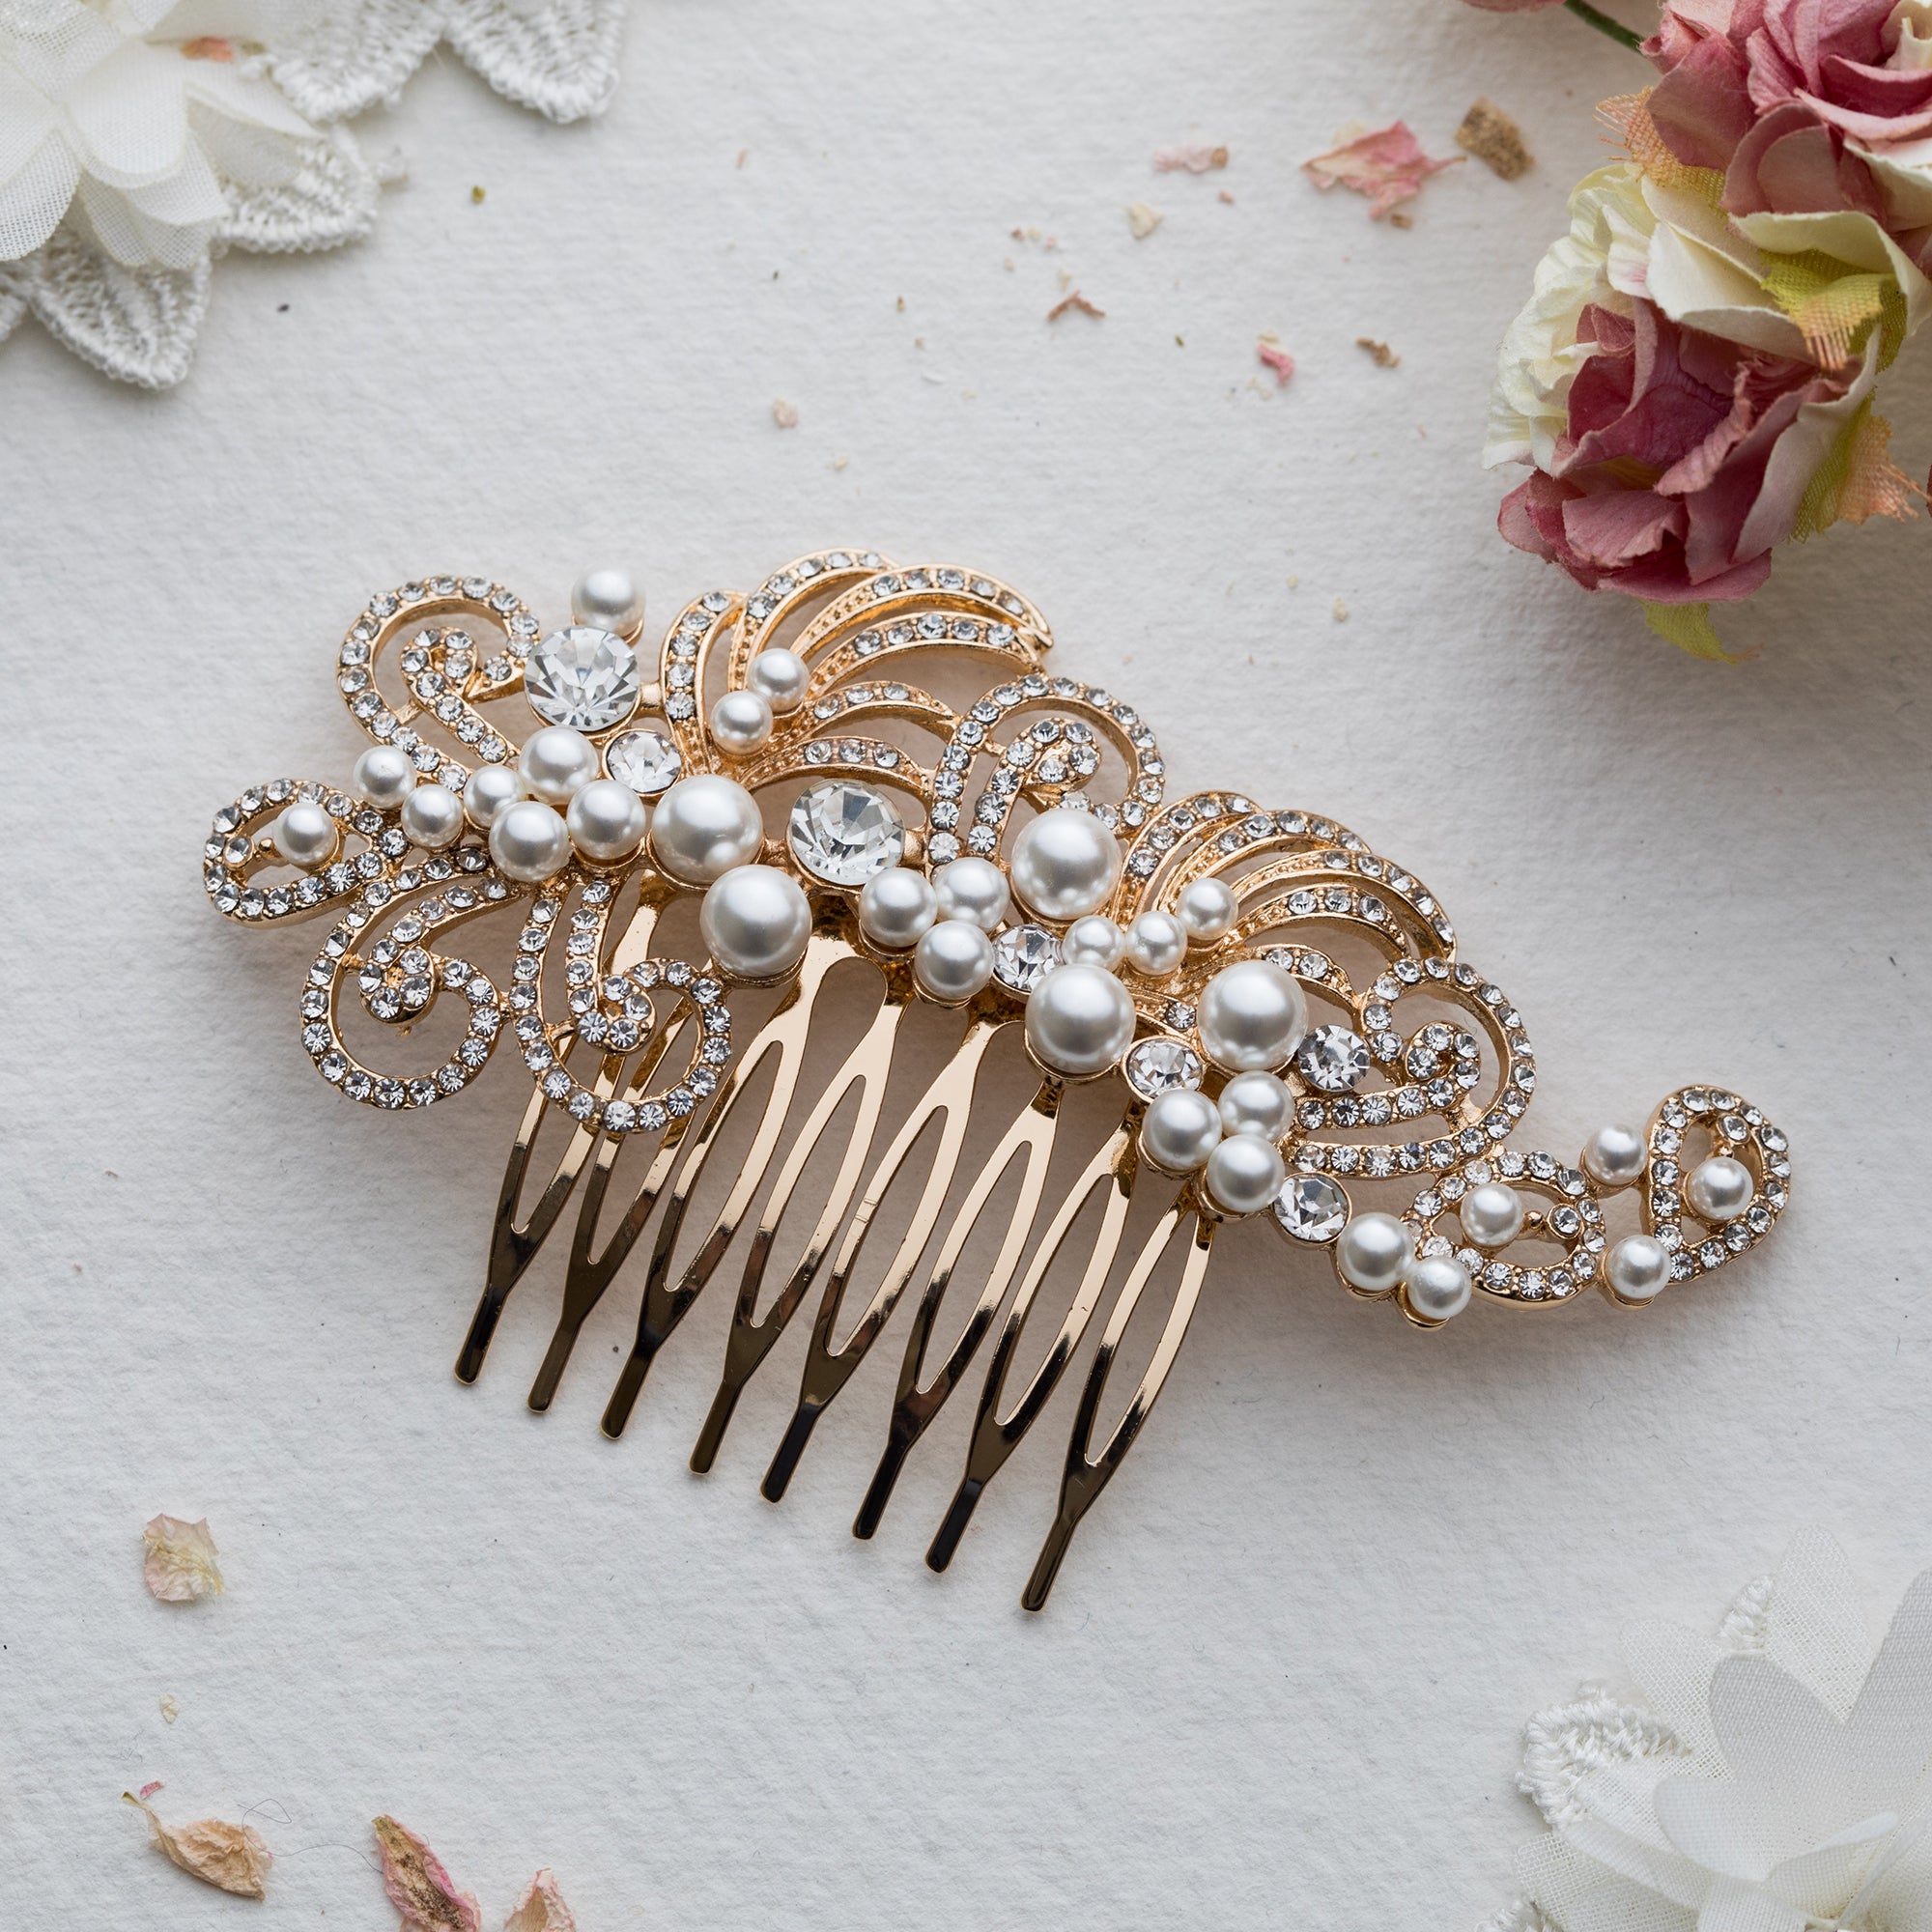 Violeta crystal and pearl silver hair comb